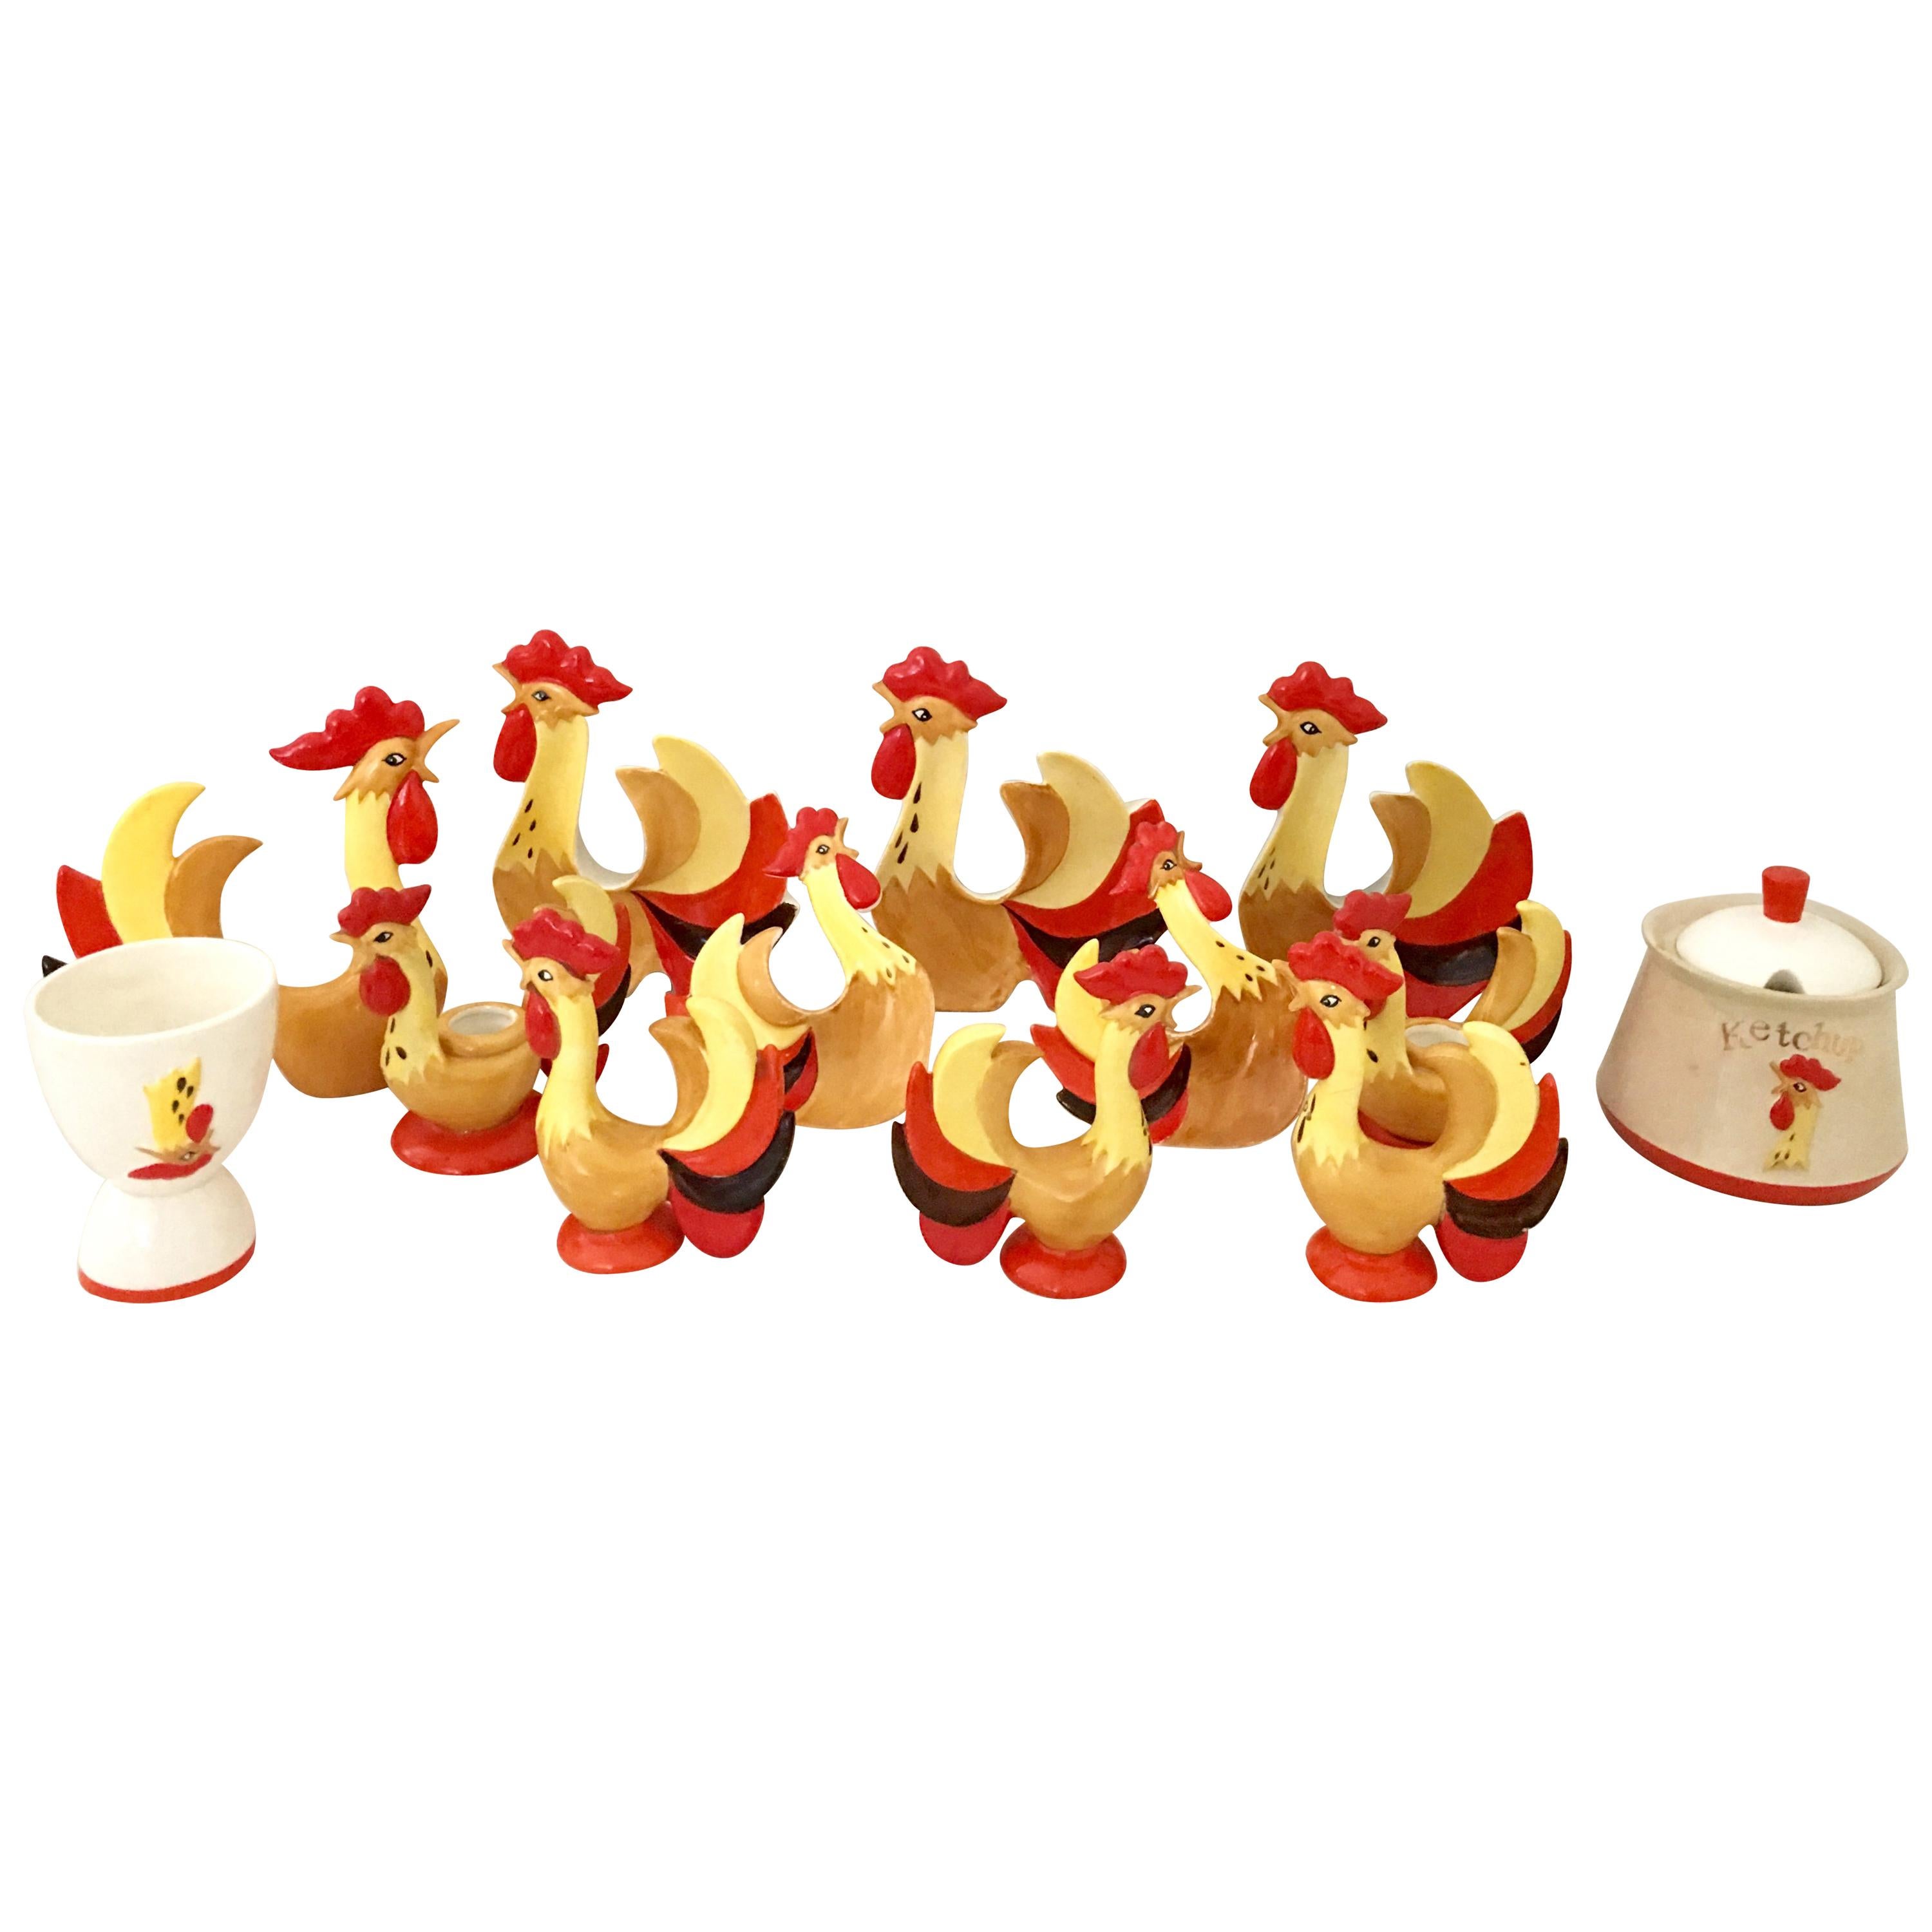 1960s Ceramic 'Red Rooster Coq Rougue' S/14 by, Holt Howard